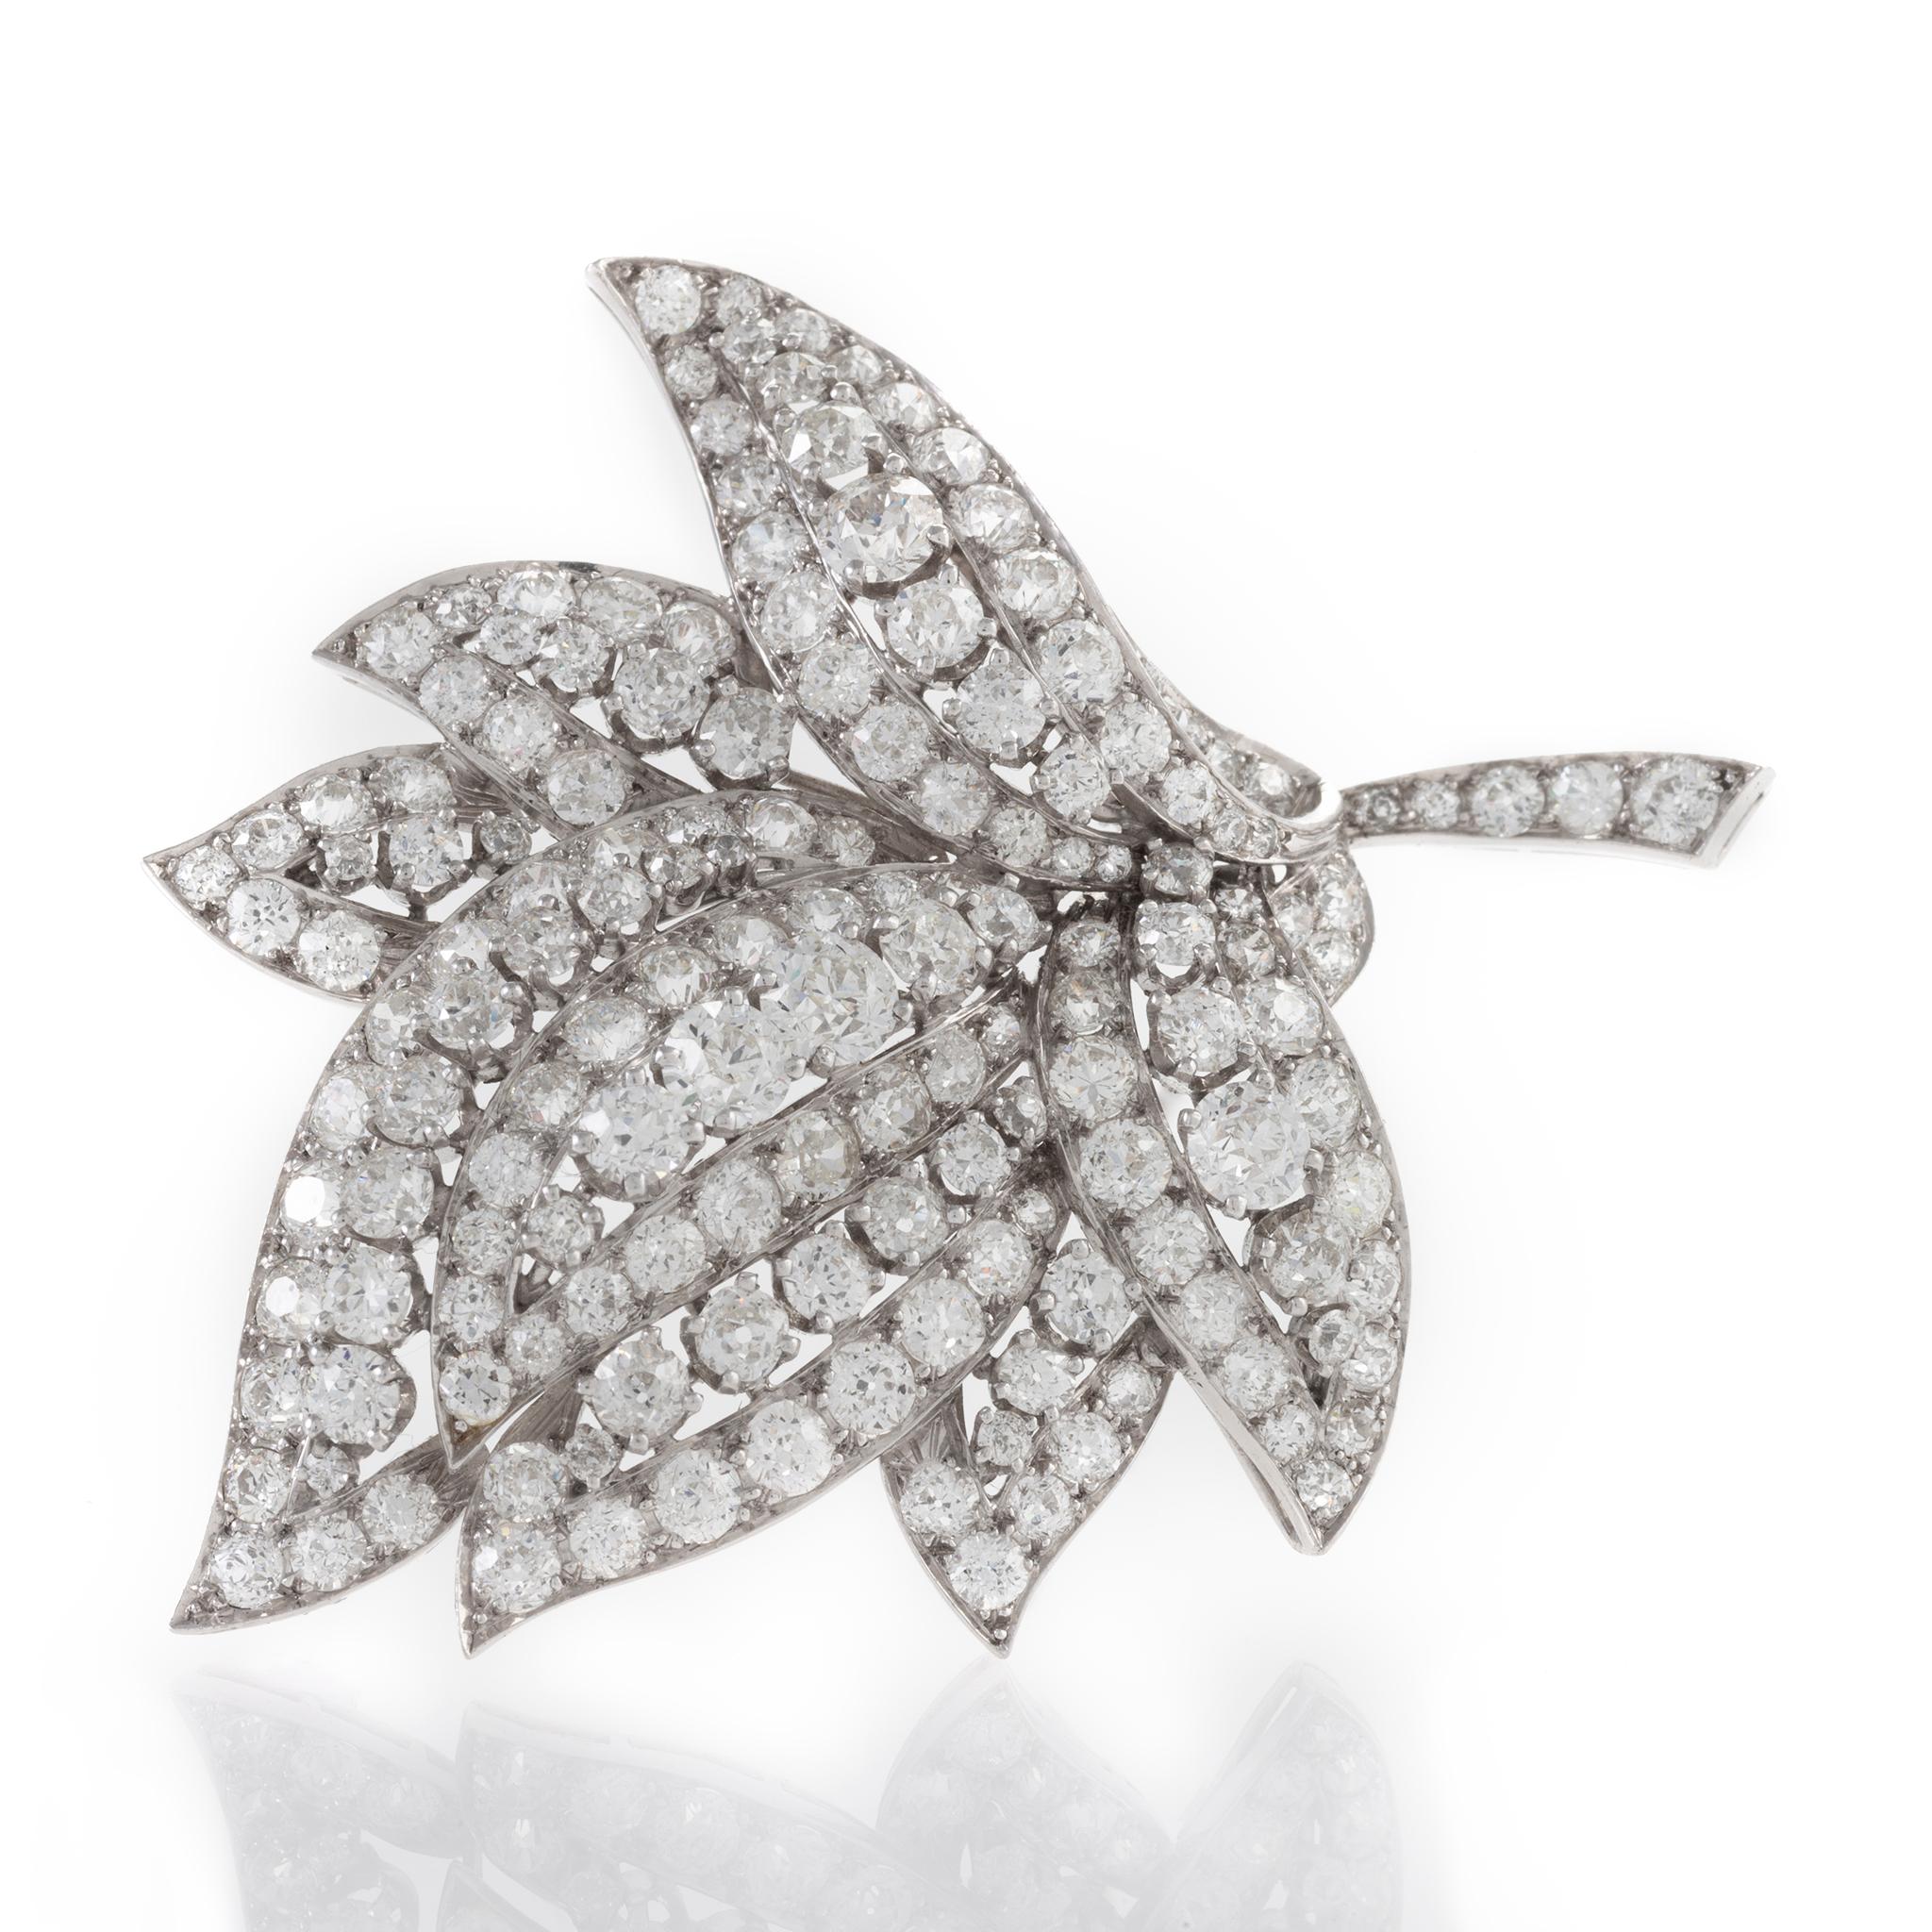 Thoughtfully-observed naturalism heightens the striking beauty of this Art Deco diamond leaf brooch, set in platinum. The sculptural modeling of the leaves and their asymmetrical, layered placement are wonderfully lifelike–the variation in diamond